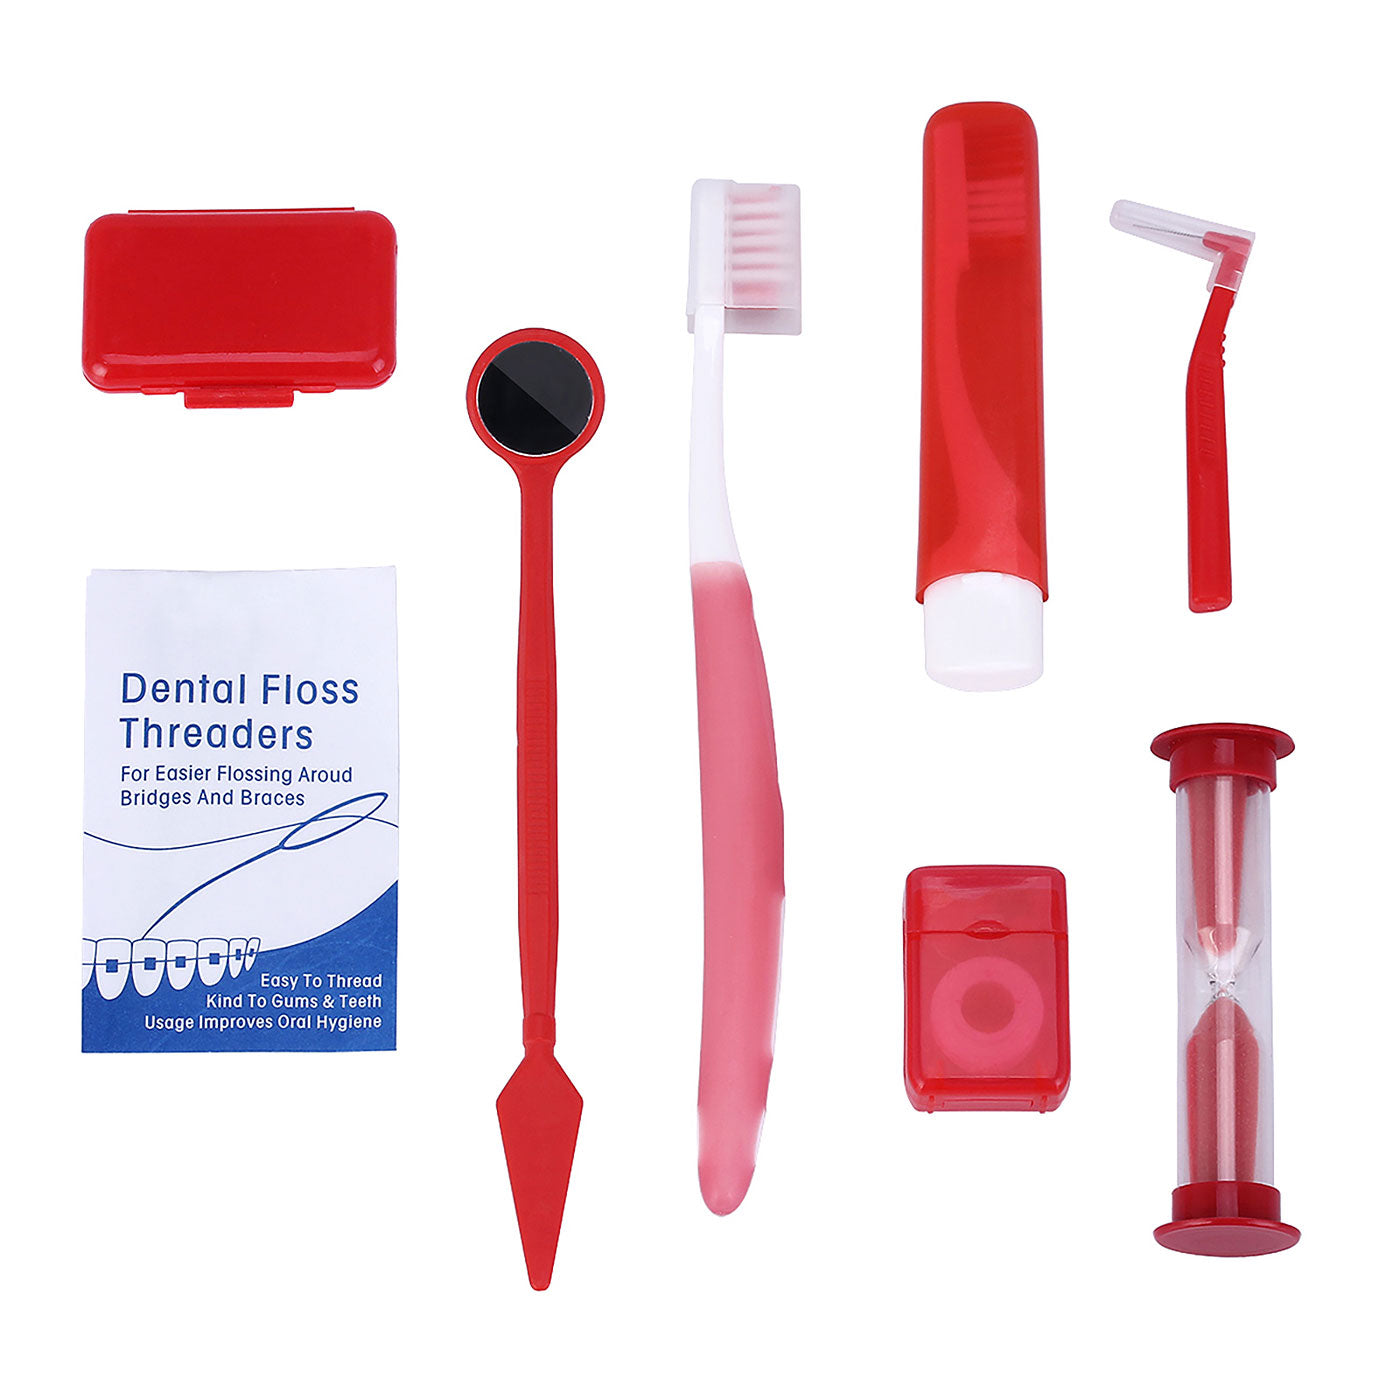 Interdental Cleaning Brush - Oral Irrigation Devices